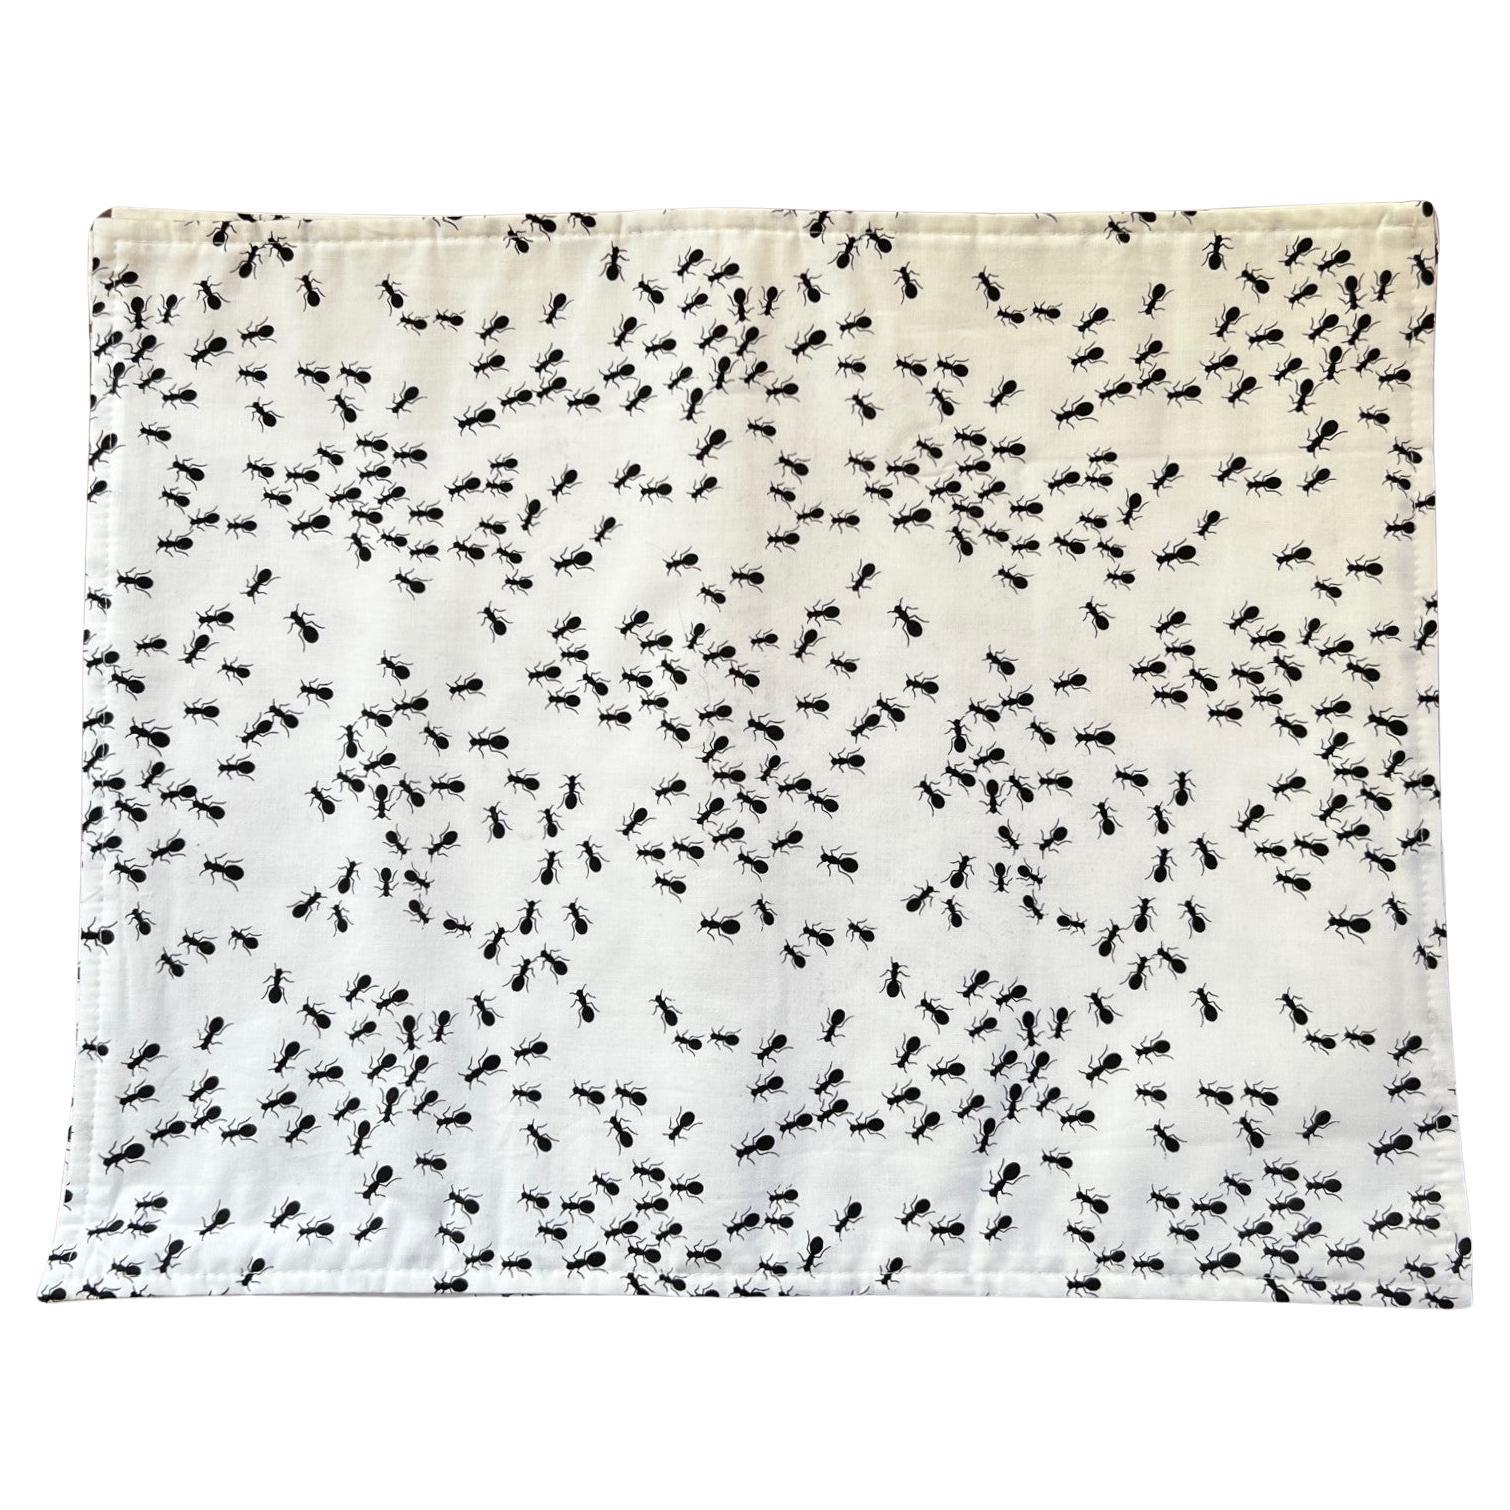 Set of 6 White Cotton Harvey & Strait Placemats with Black Ants For Sale